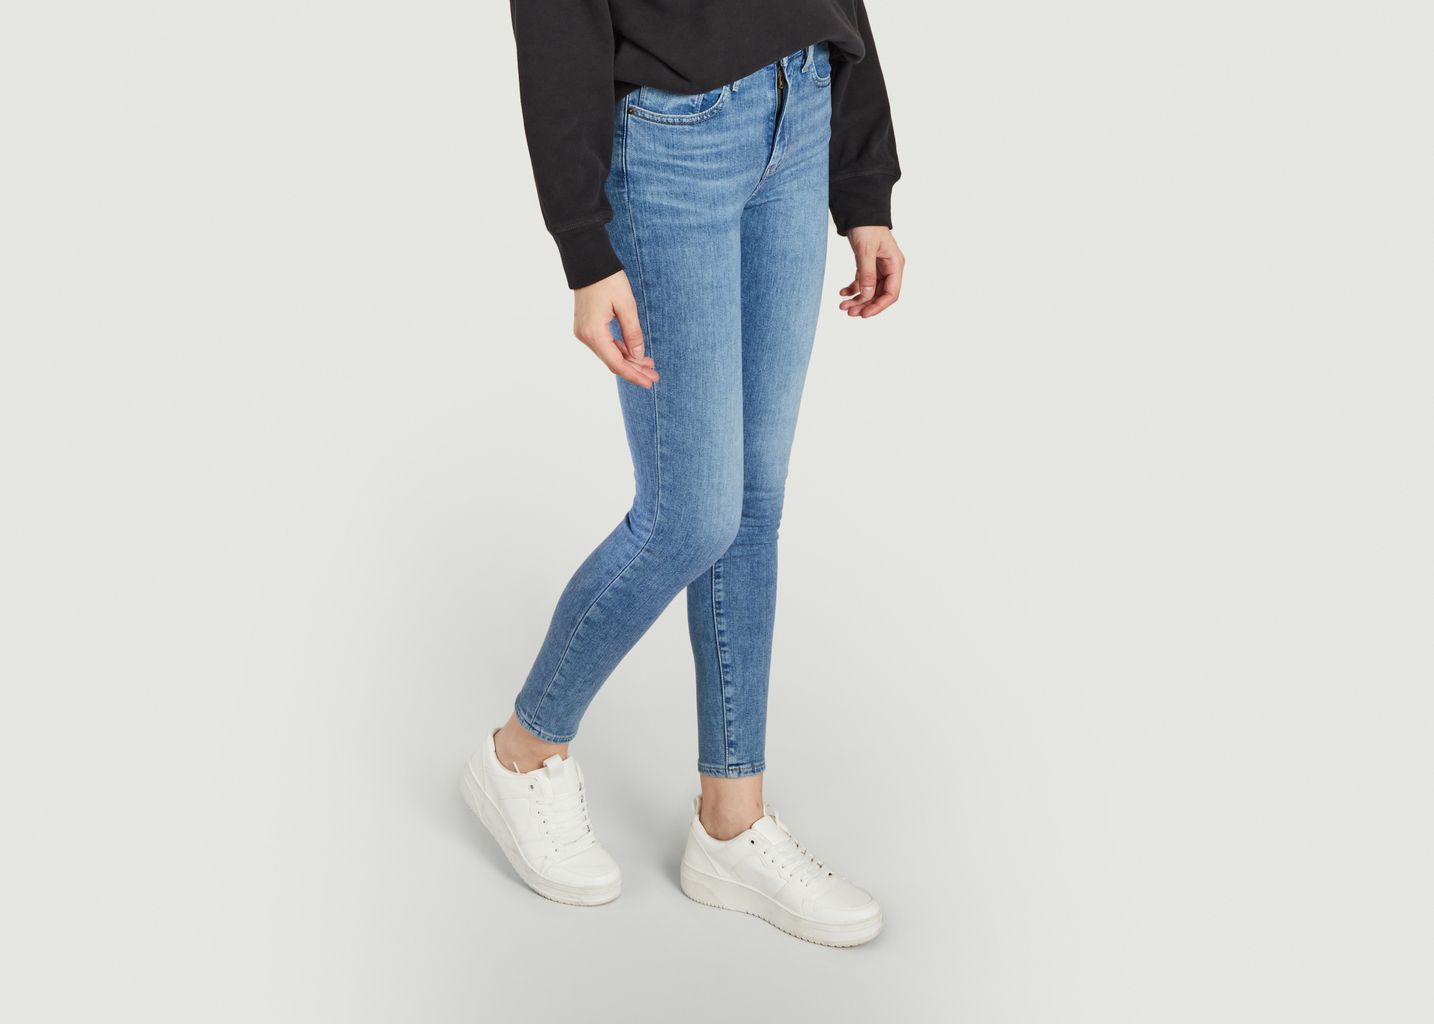 Jean 721 High Rise Skinny - Levi's Red Tab